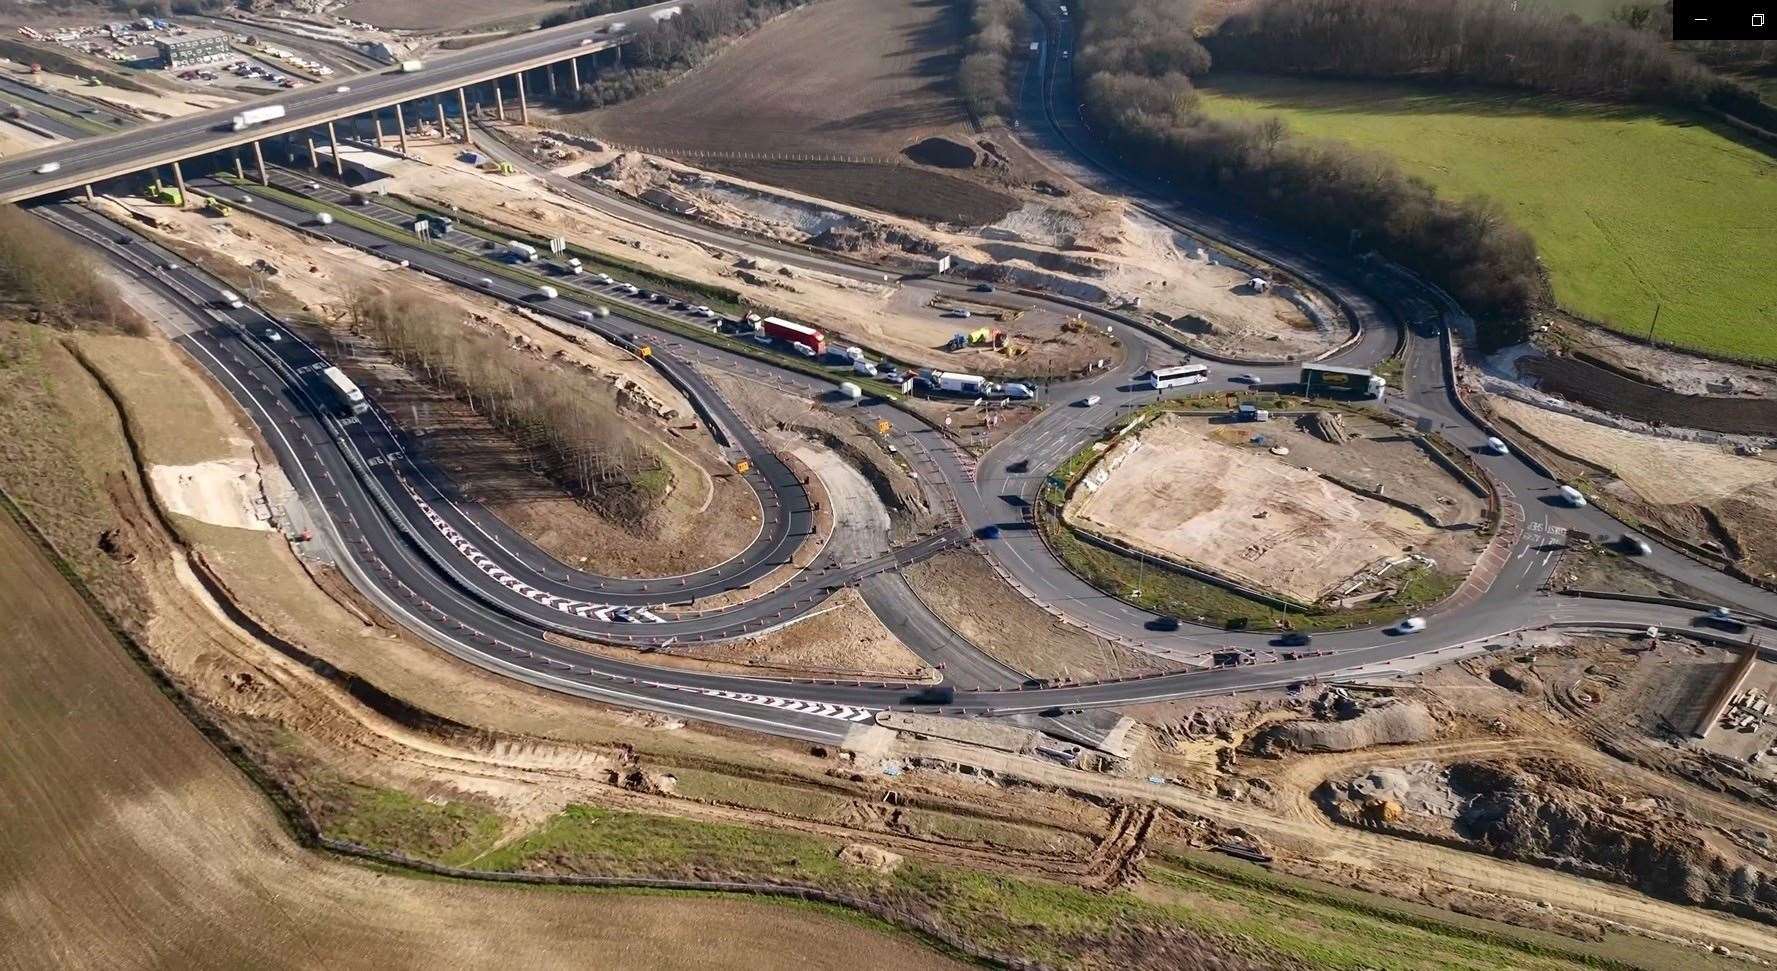 Progress on the new slip roads linking the coastbound M2 with the A249 at Stockbury. Picture: Philip Drew